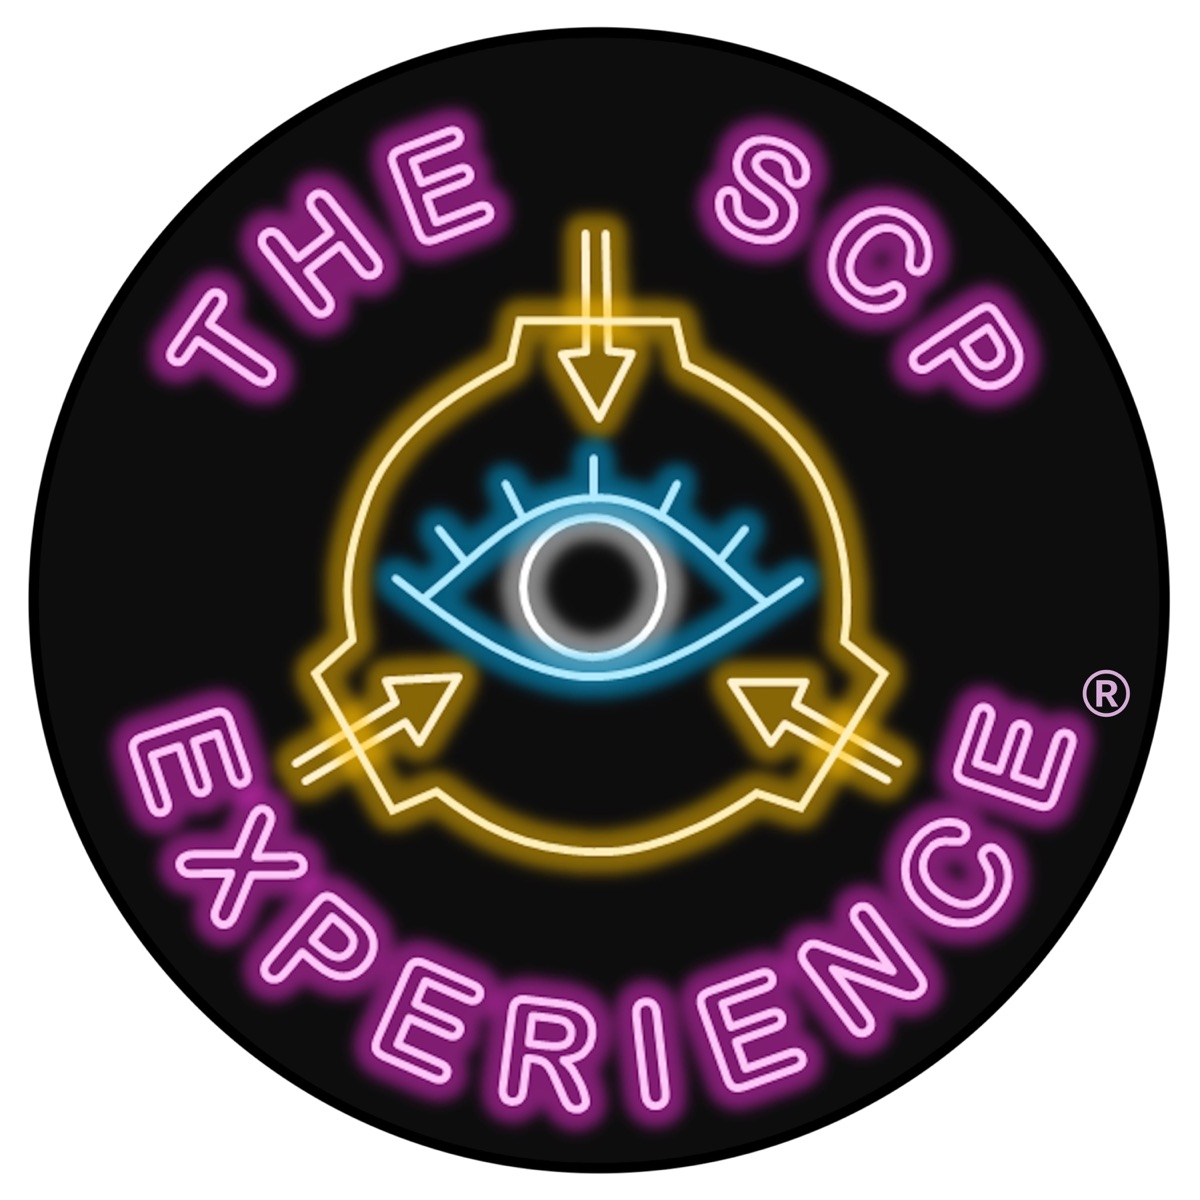 The SCP Foundation – SCP Series